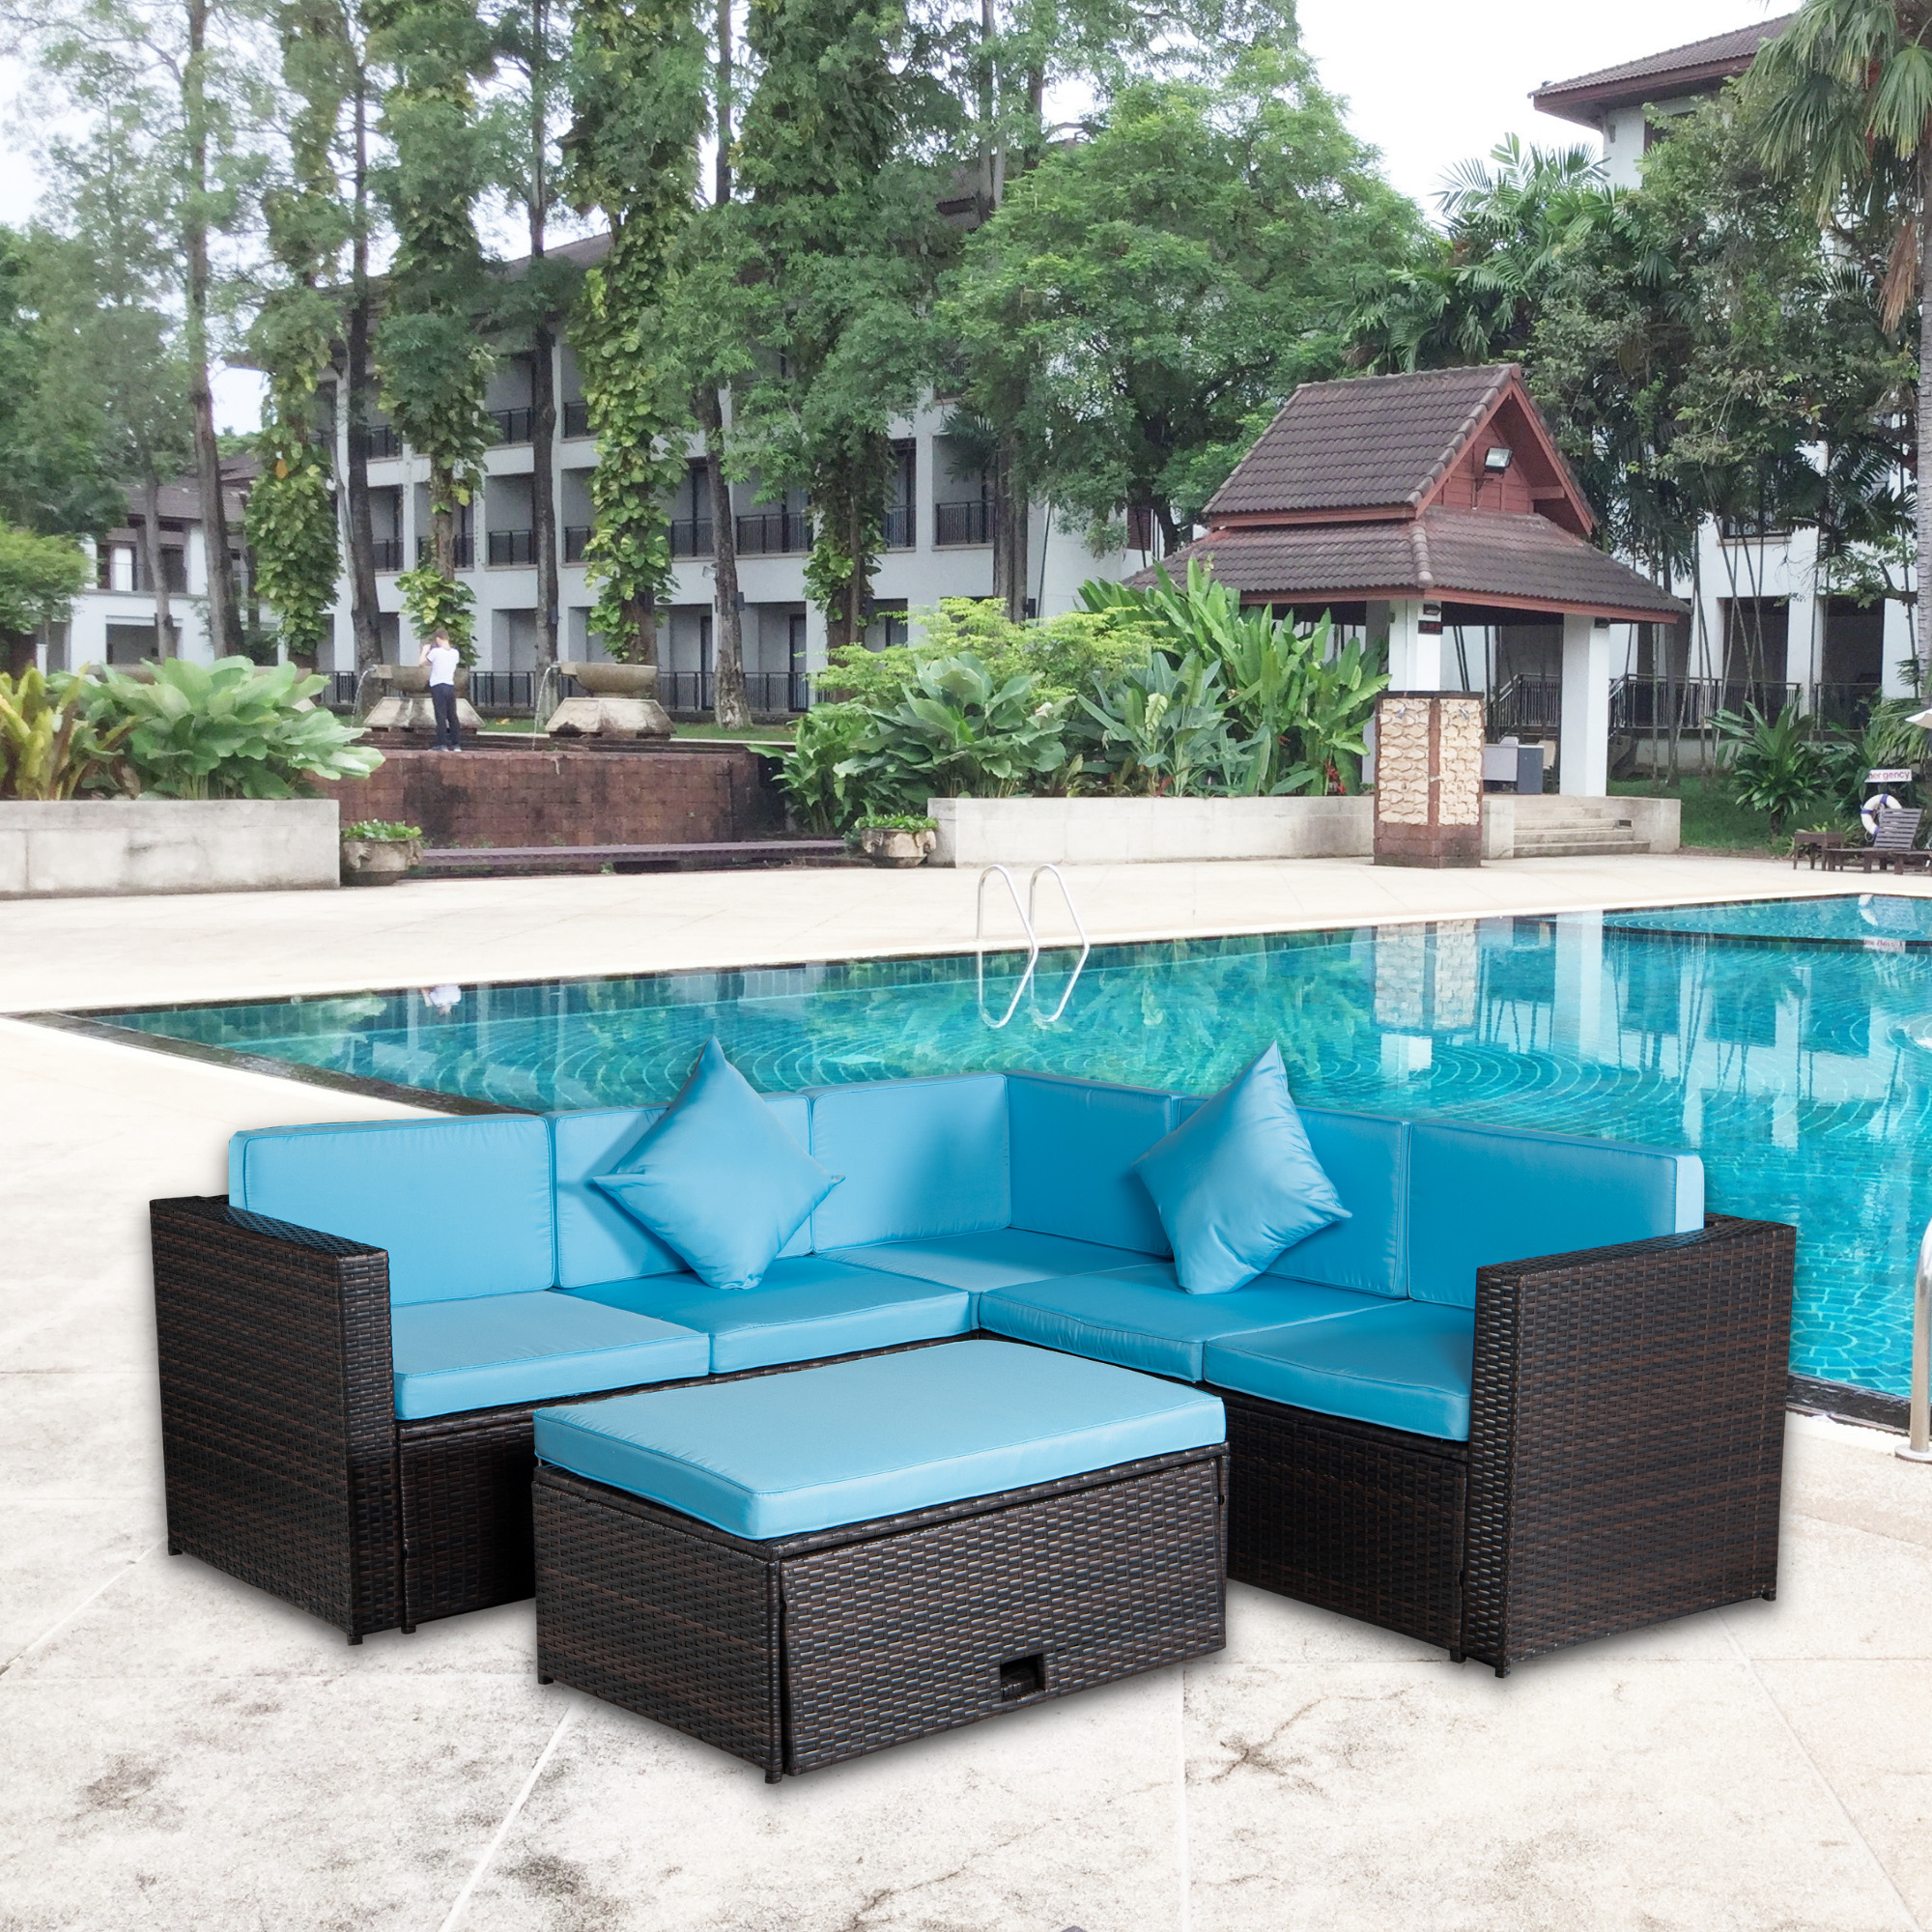 SYNGAR Outdoor Furniture Sets Sofa Sets, 4 PCS Conversation Sets Sectional Furniture Set with 2 Loveseat, Corner Chair, and Wicker Table for Garden Poolside Deck, LJ3279 - image 1 of 11